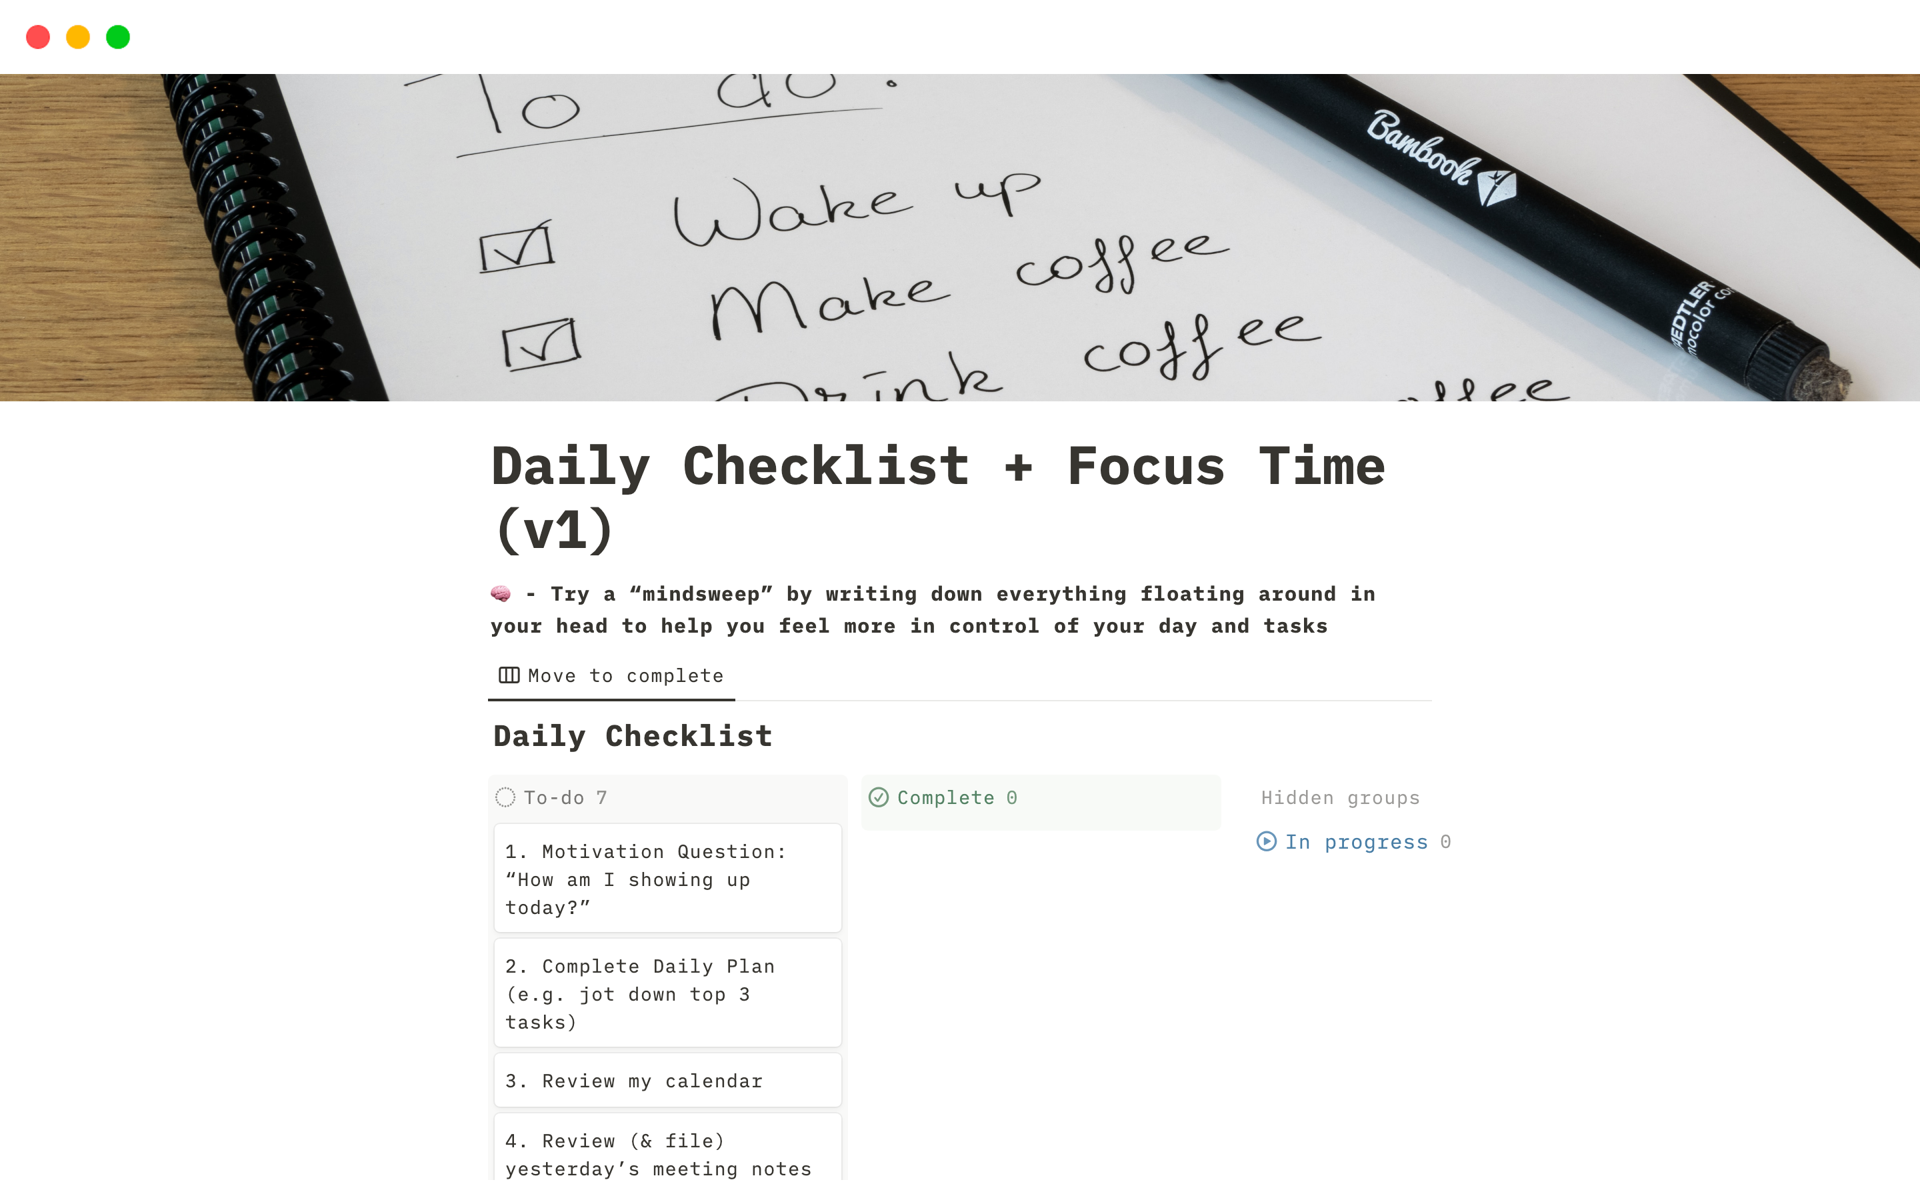 This template will help someone find a time in their day to feel more in control of their to do list and to ensure they focus on the most important work